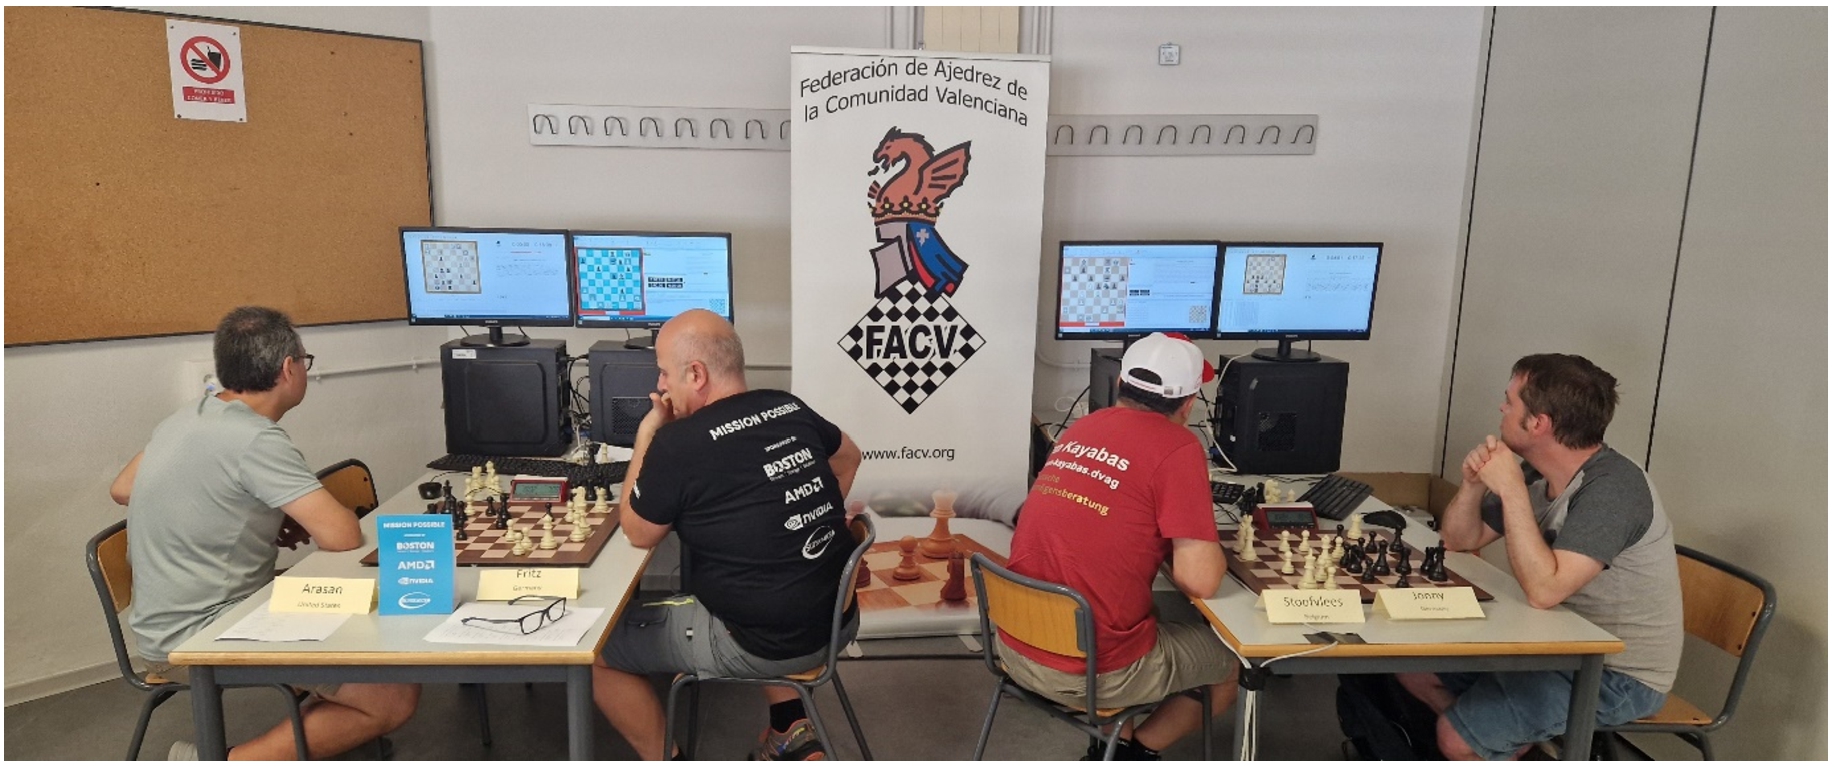 Playing area in Valencia (photo: Richard Pijl).